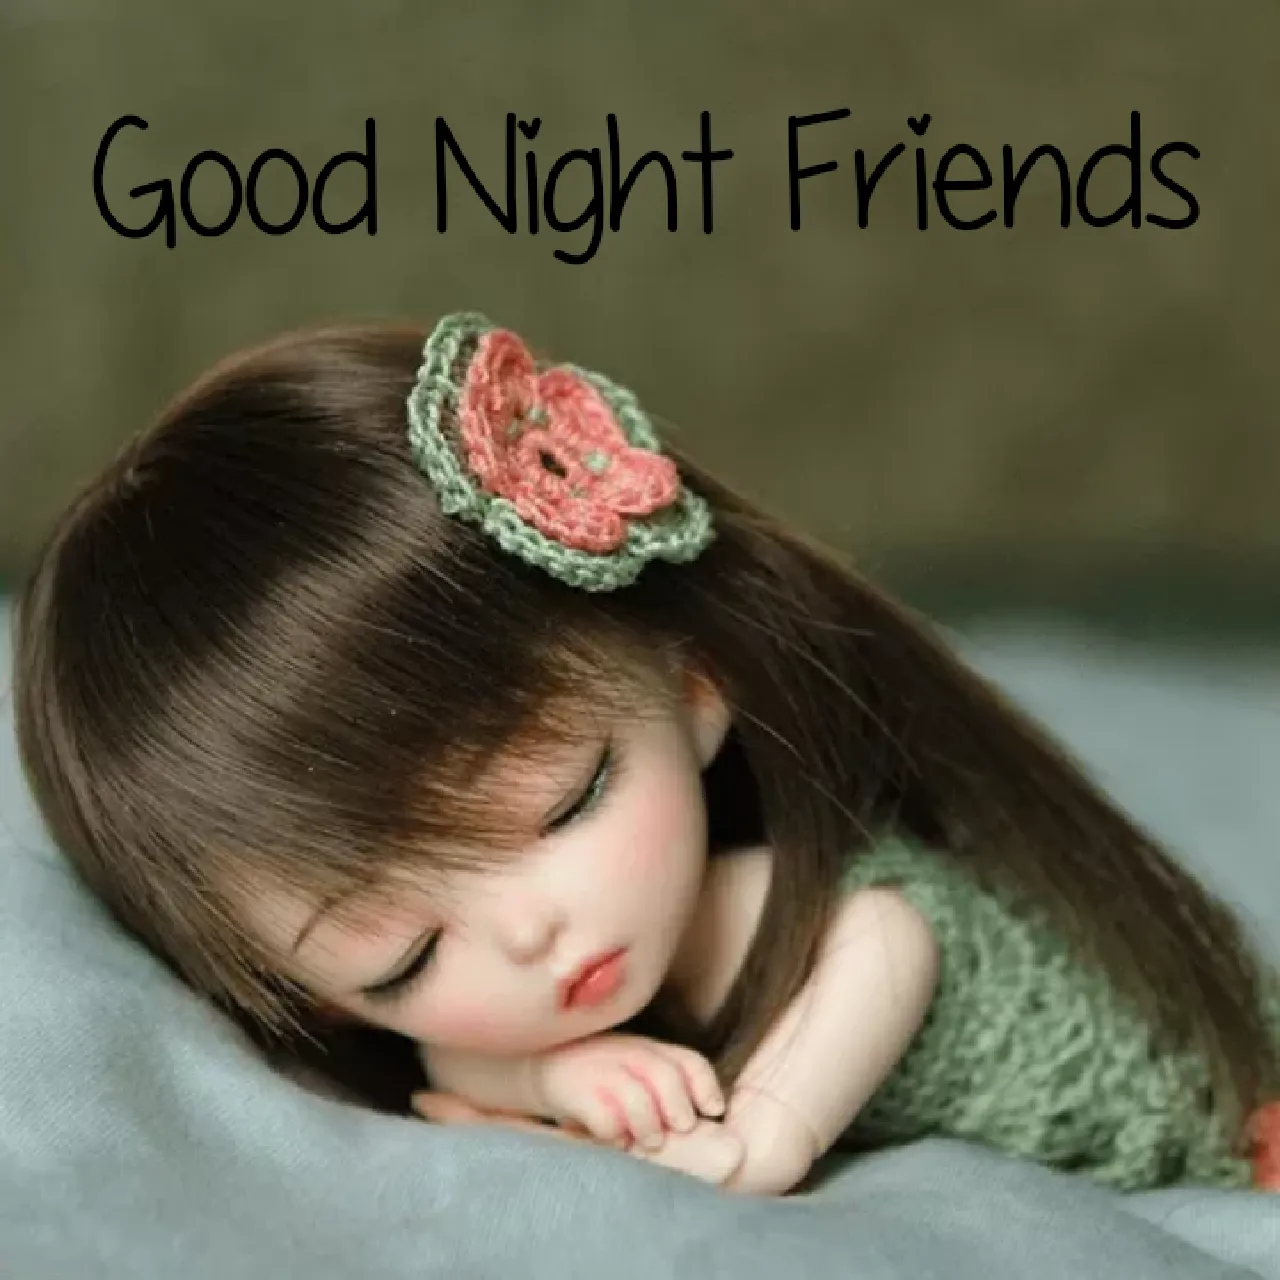 good night friends • ShareChat Photos and Videos